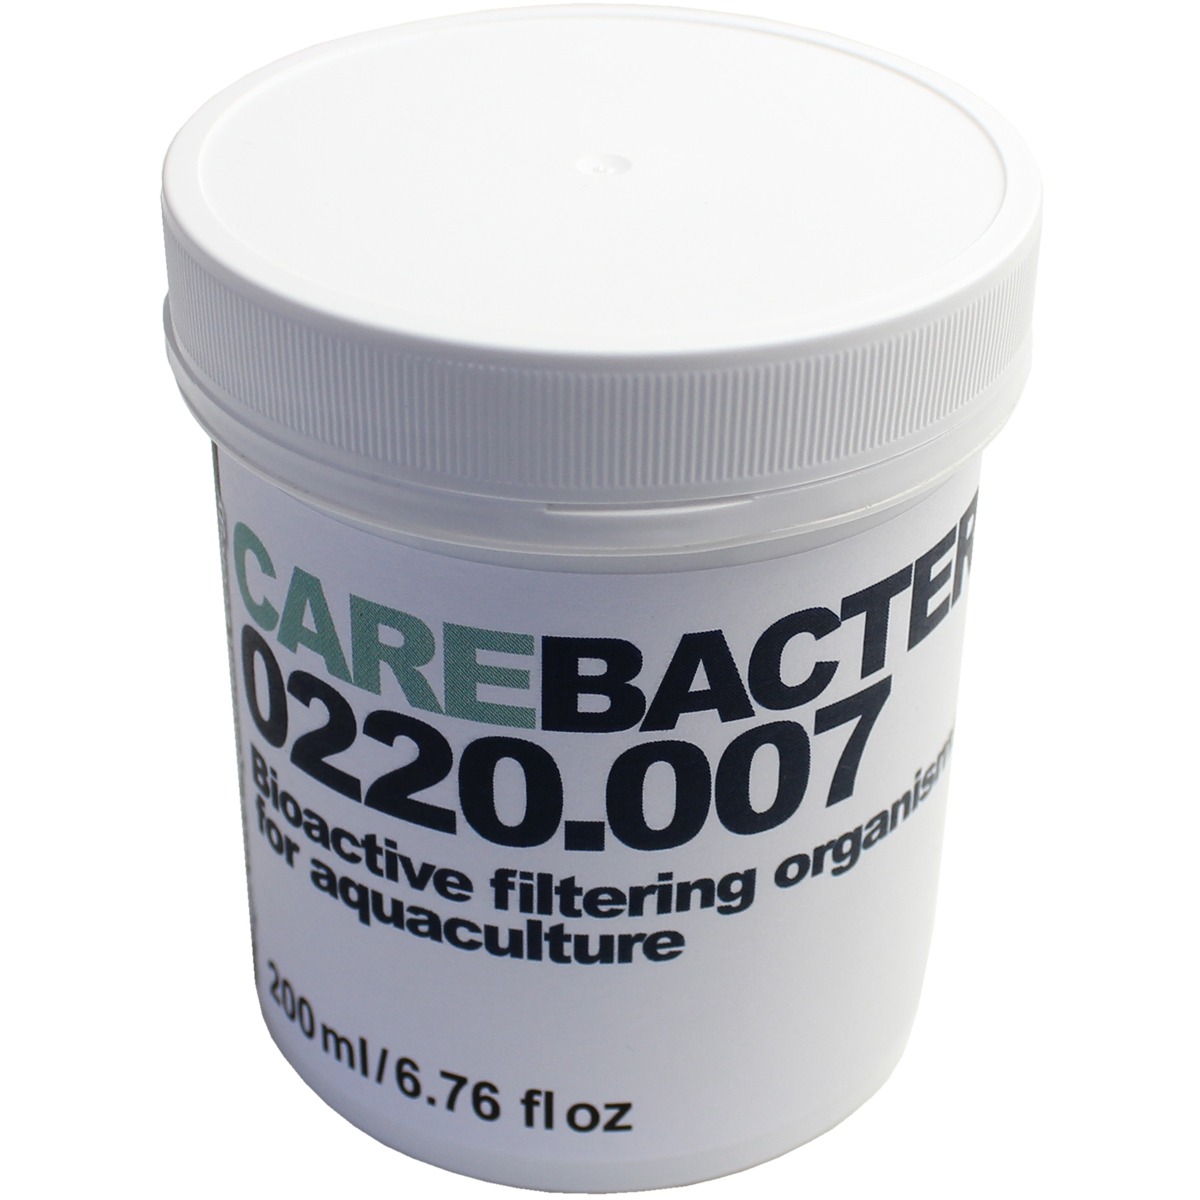 Care Bacter 0220.007